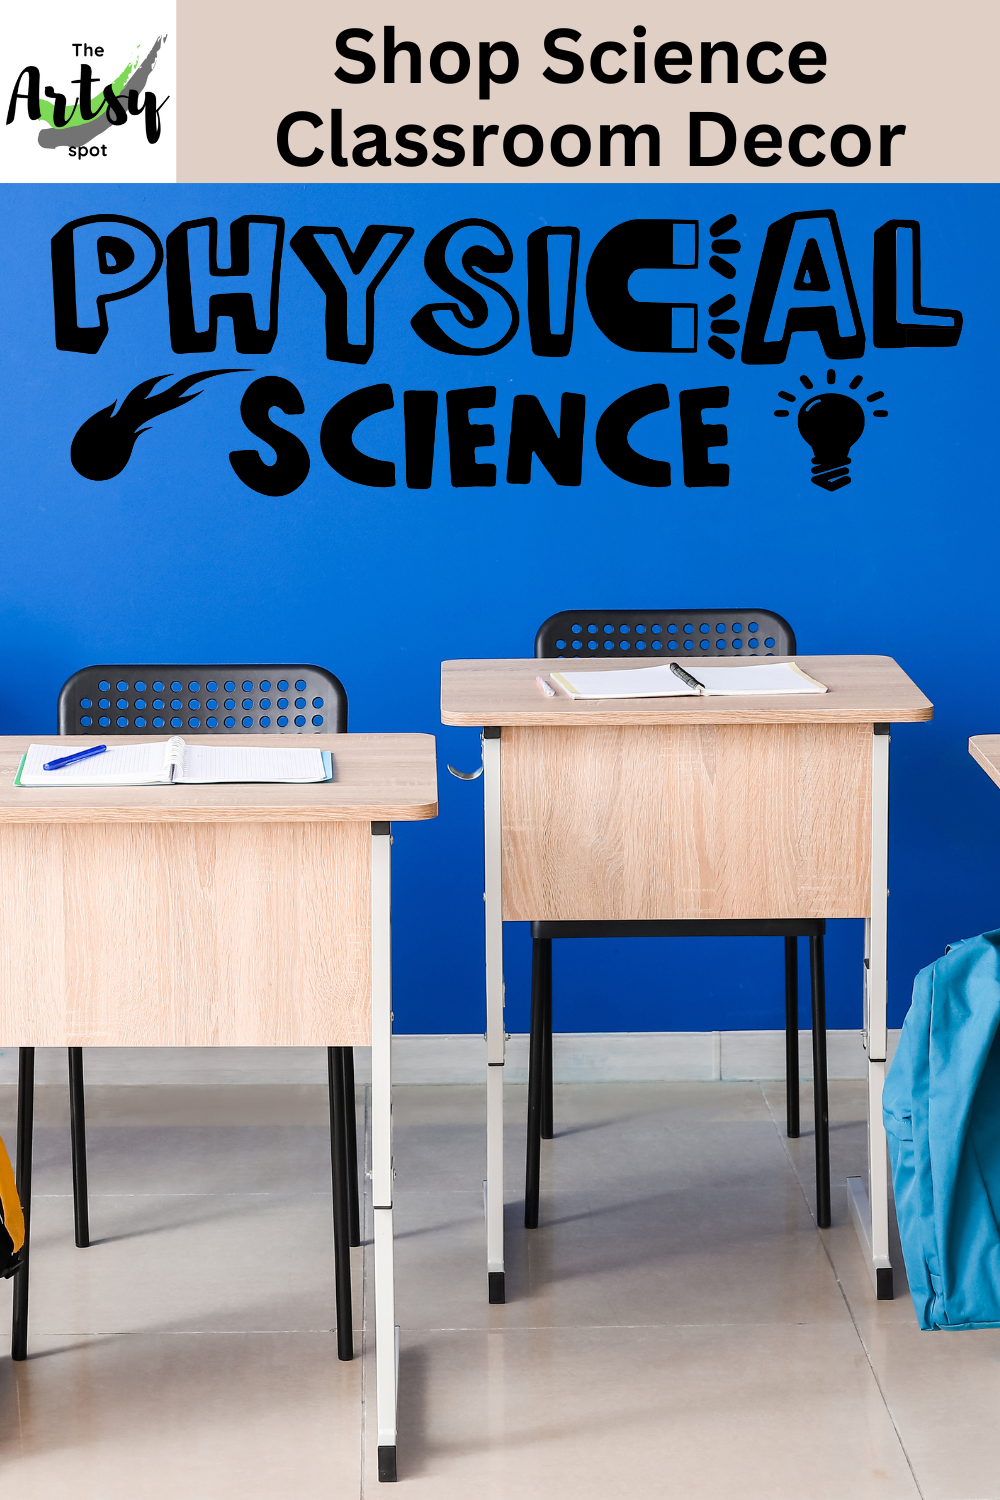 Physical Science Decal Classroom Wall The Artsy Spot